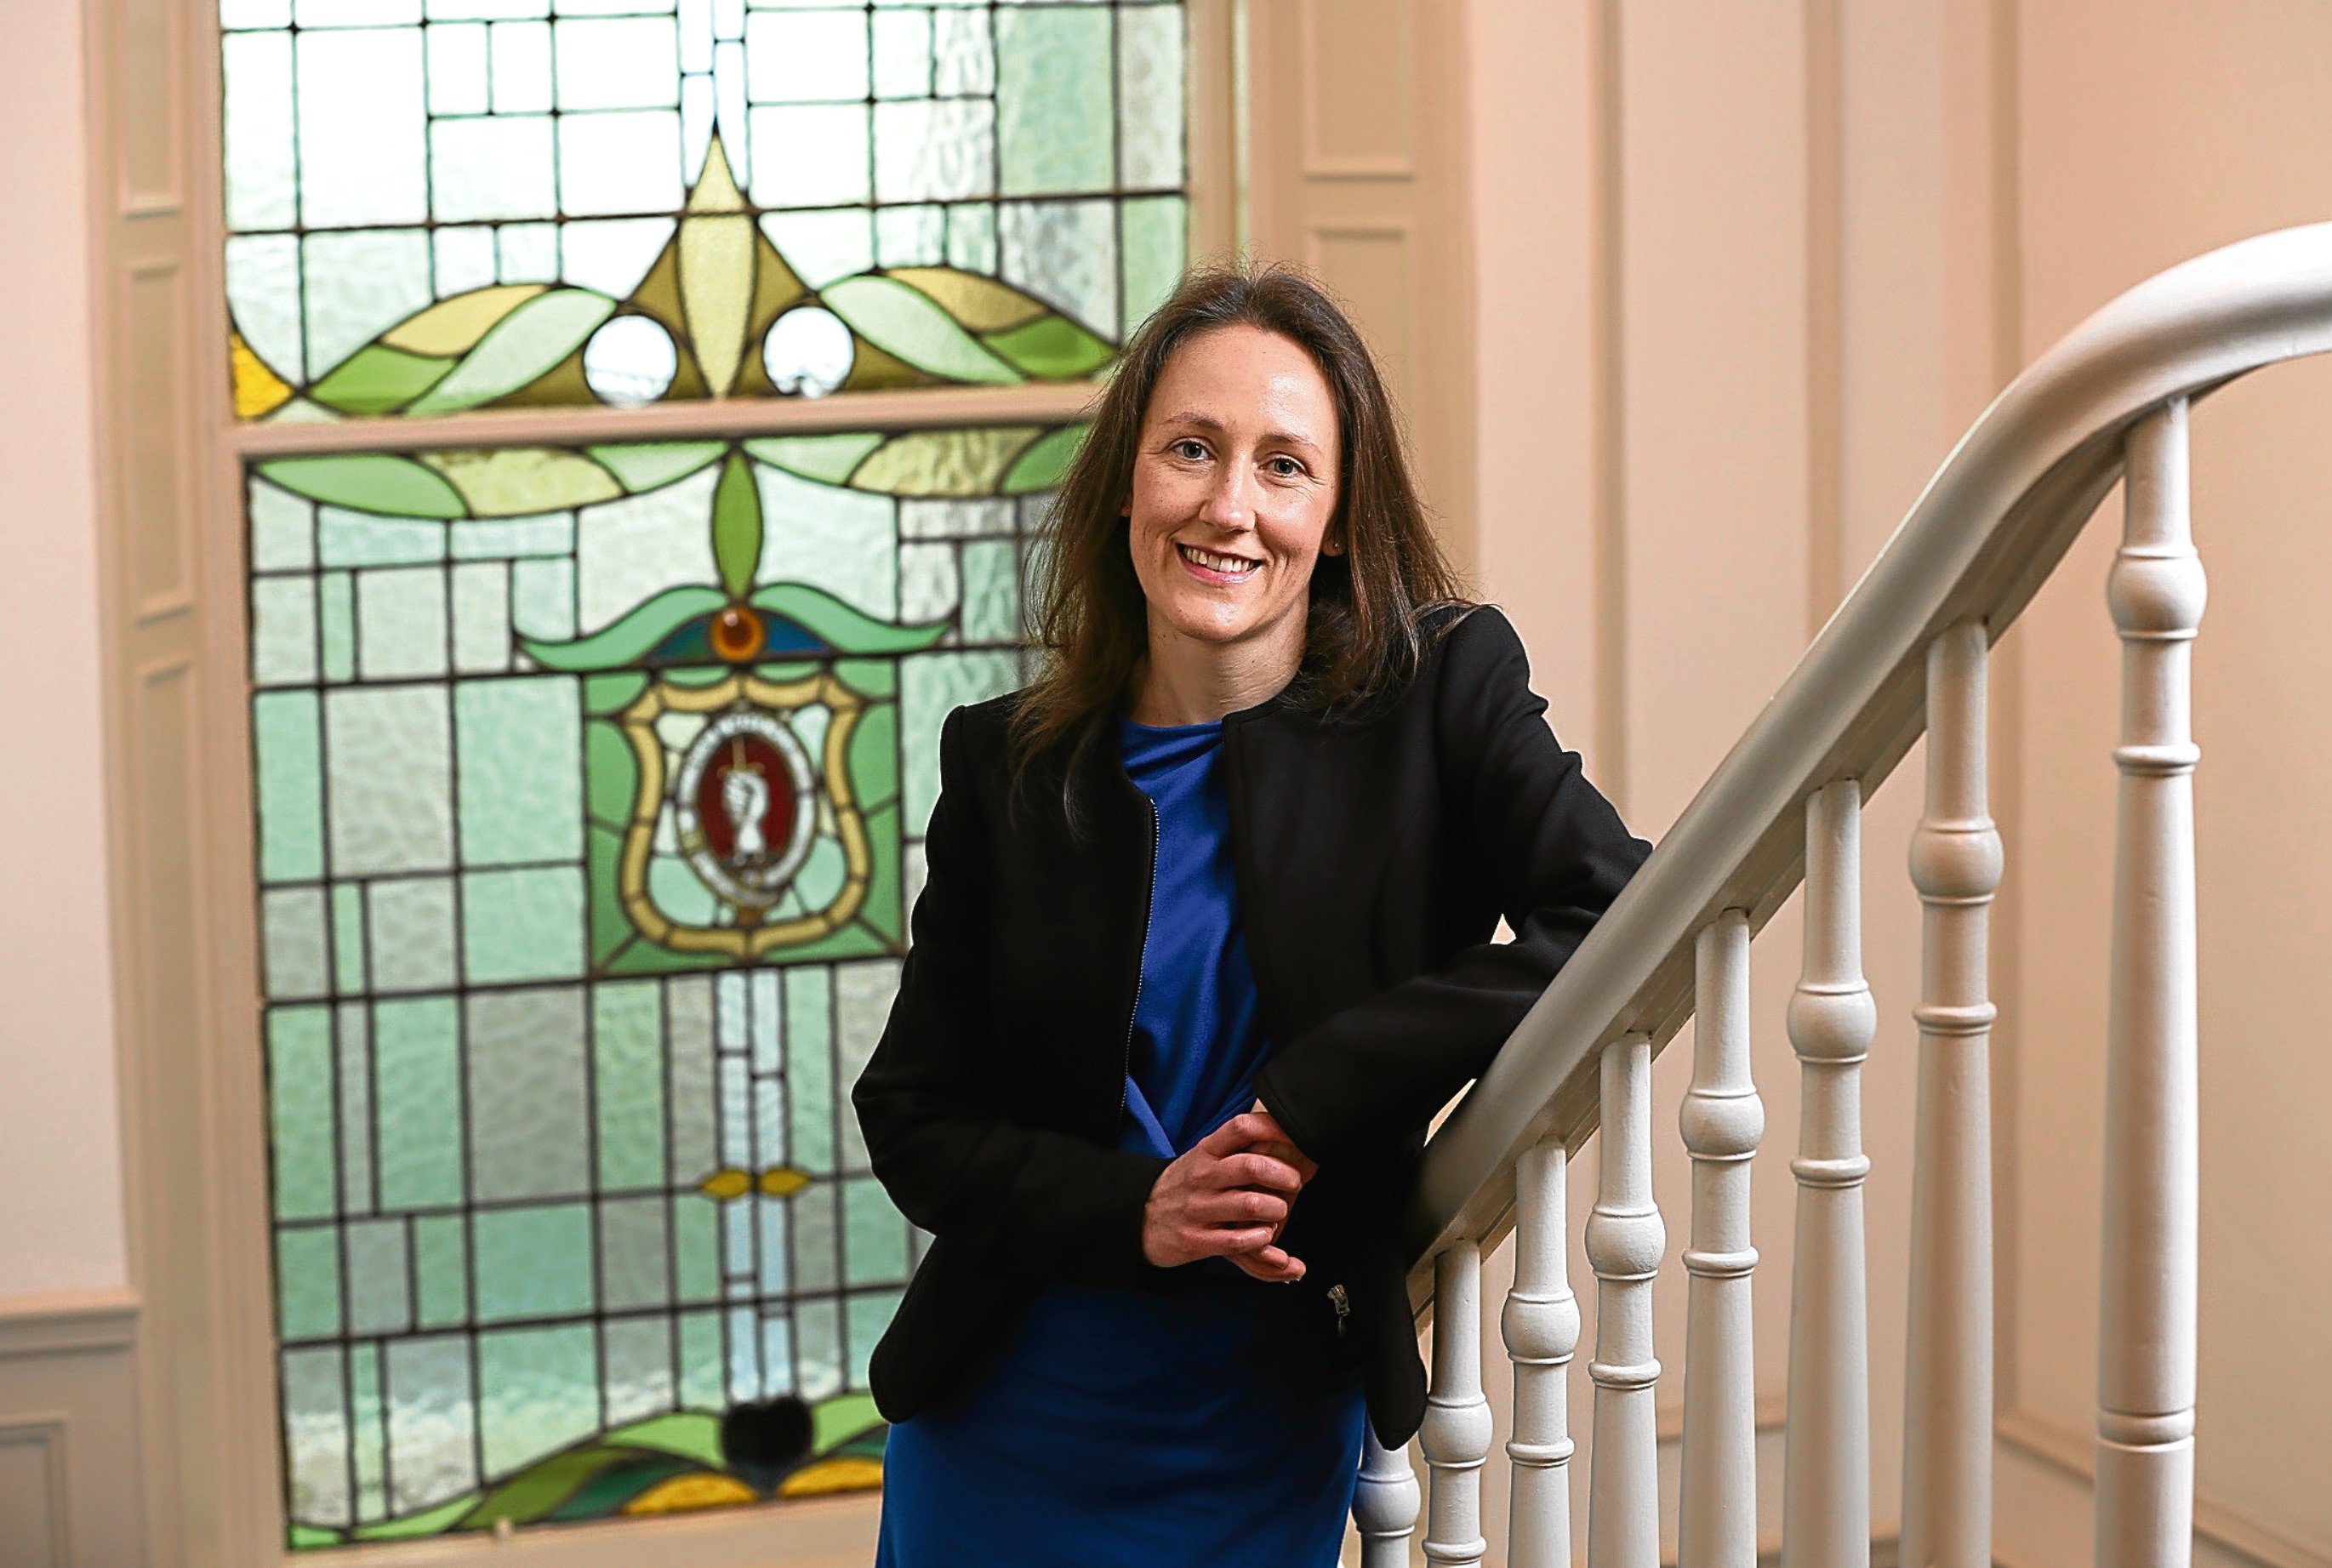 Kate Williams, head of the Aberdeen office of Pinsent Masons